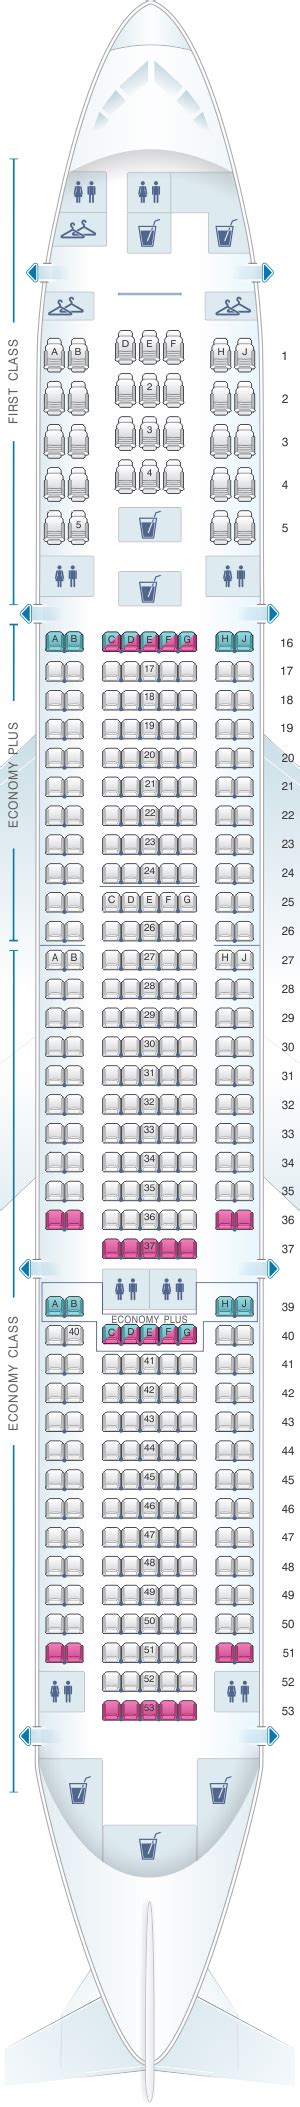 Boeing 777 united seat map. Note: Specifications are listed as standard and may vary slightly. Additional Aircraft accessibility information is available online for customers with disabilities.. Definitions. Seat Pitch: The measure of legroom that refers to the space between a point on one seat and the same point on the seat in front of it. Seat Width: The distance between the inner sides of the armrests on a seat. 